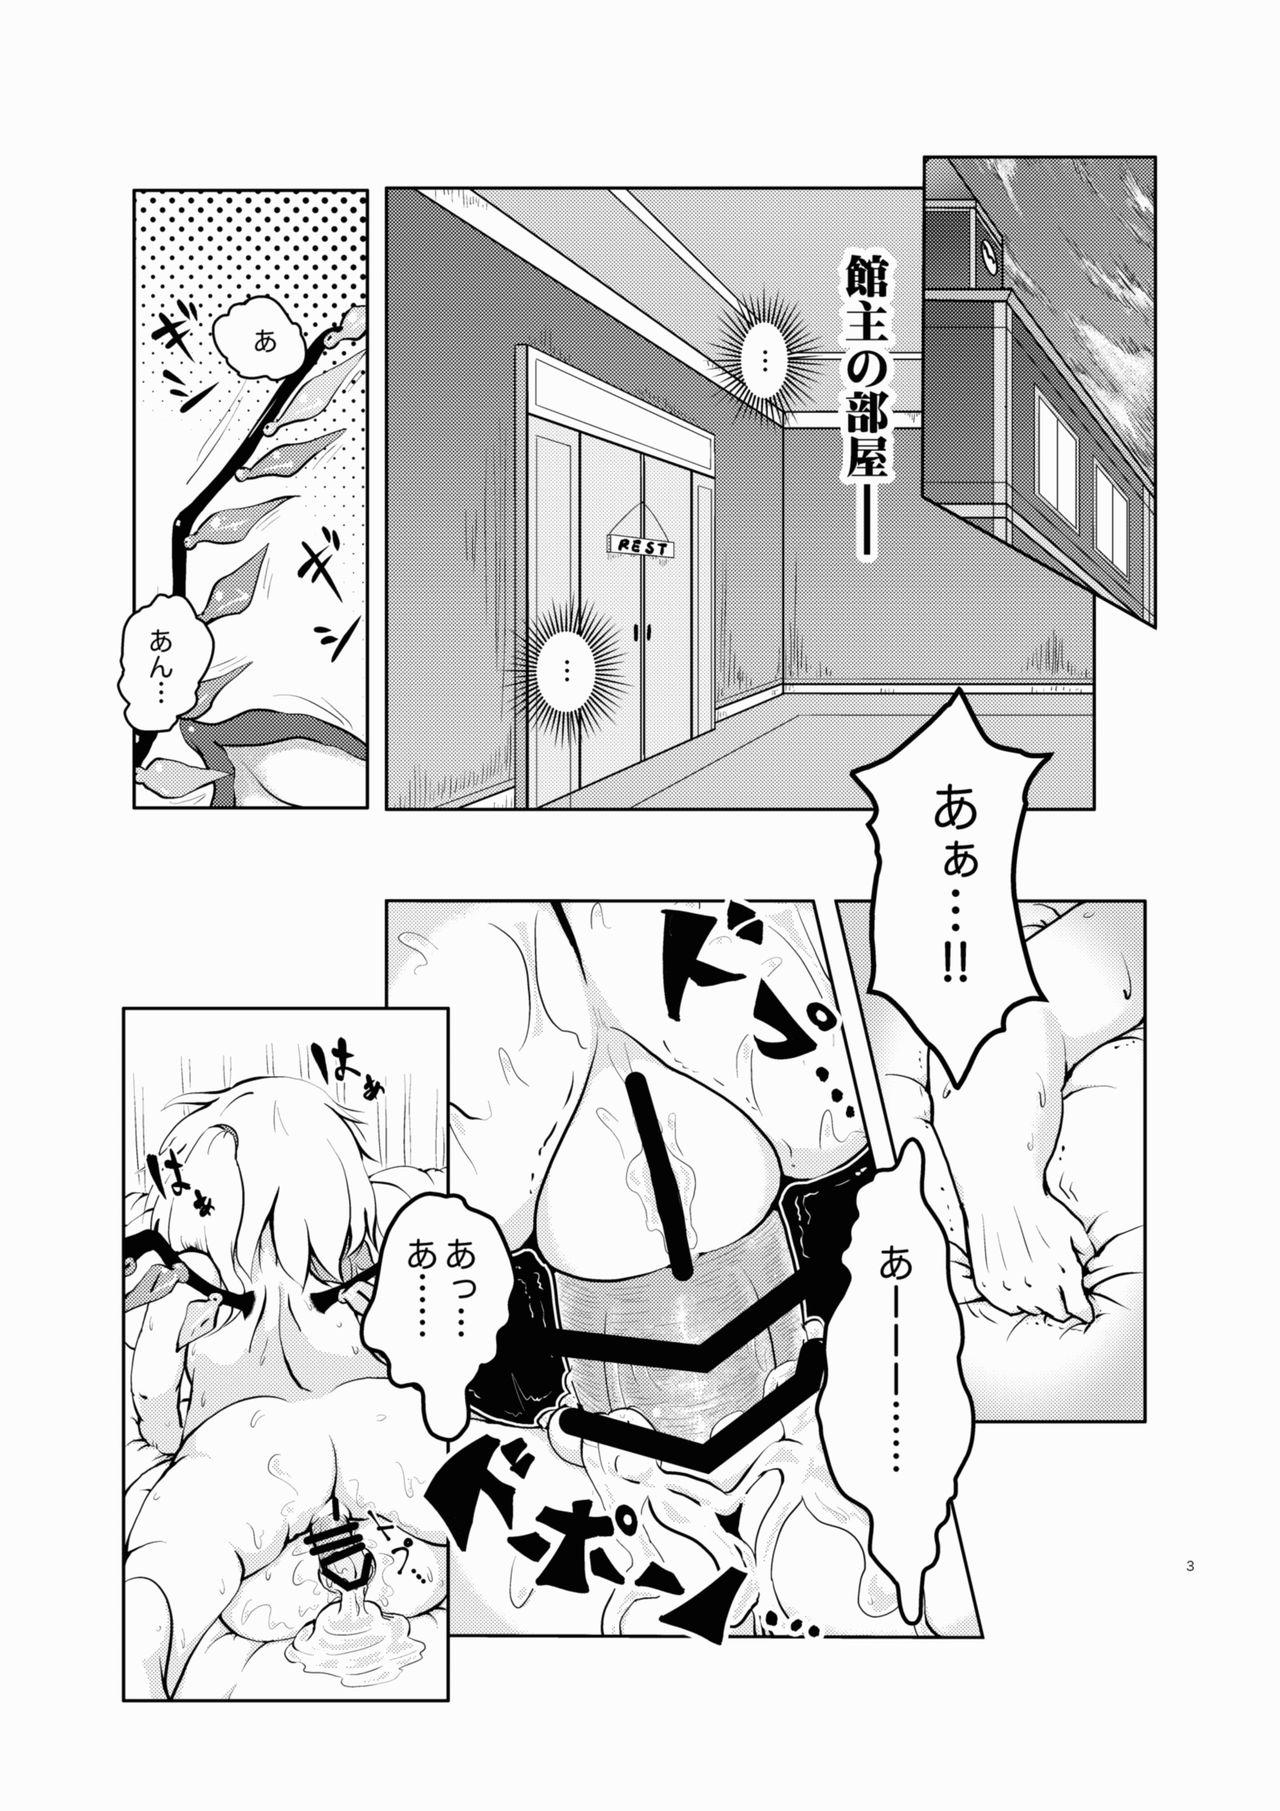 Ikillitts Scarlet Conflict 1 - Touhou project Chupa - Page 3